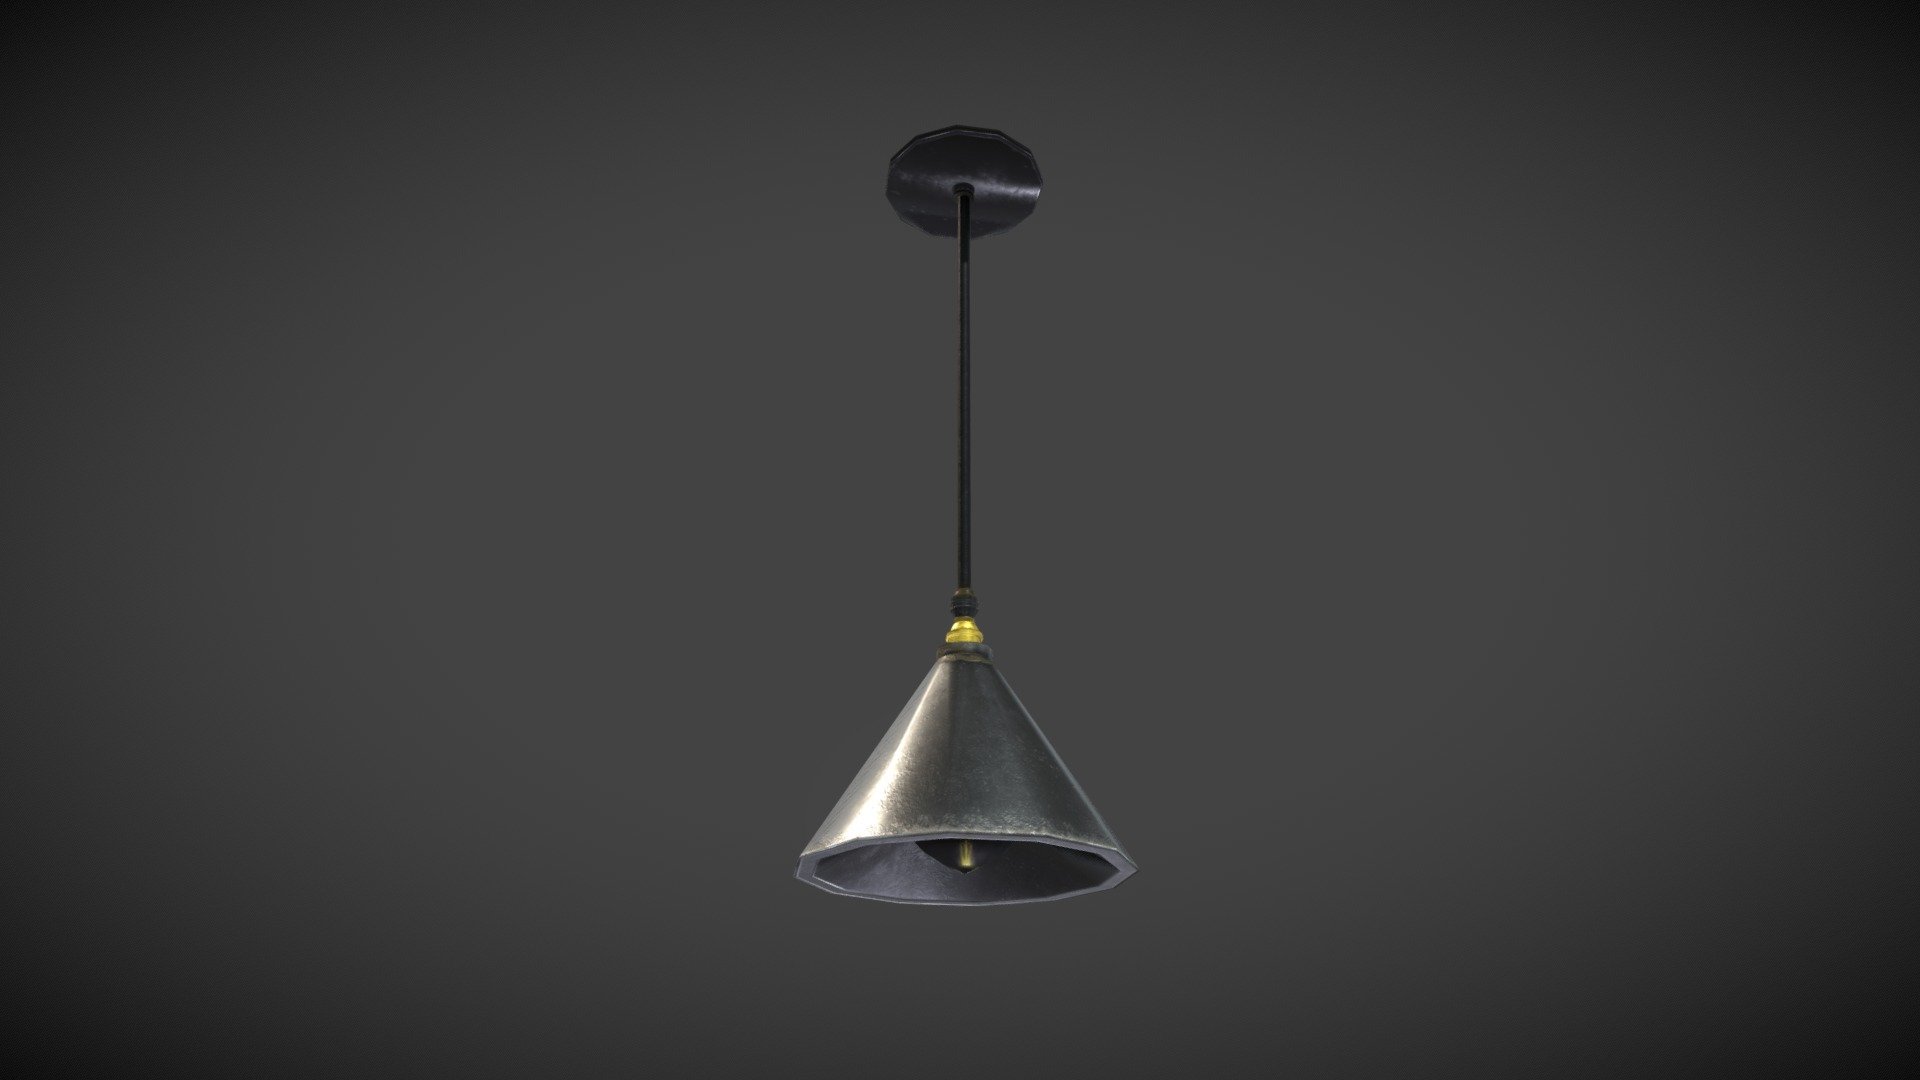 Elegant cone shaped metal ceiling lamp.
Low poly and game ready 3d model